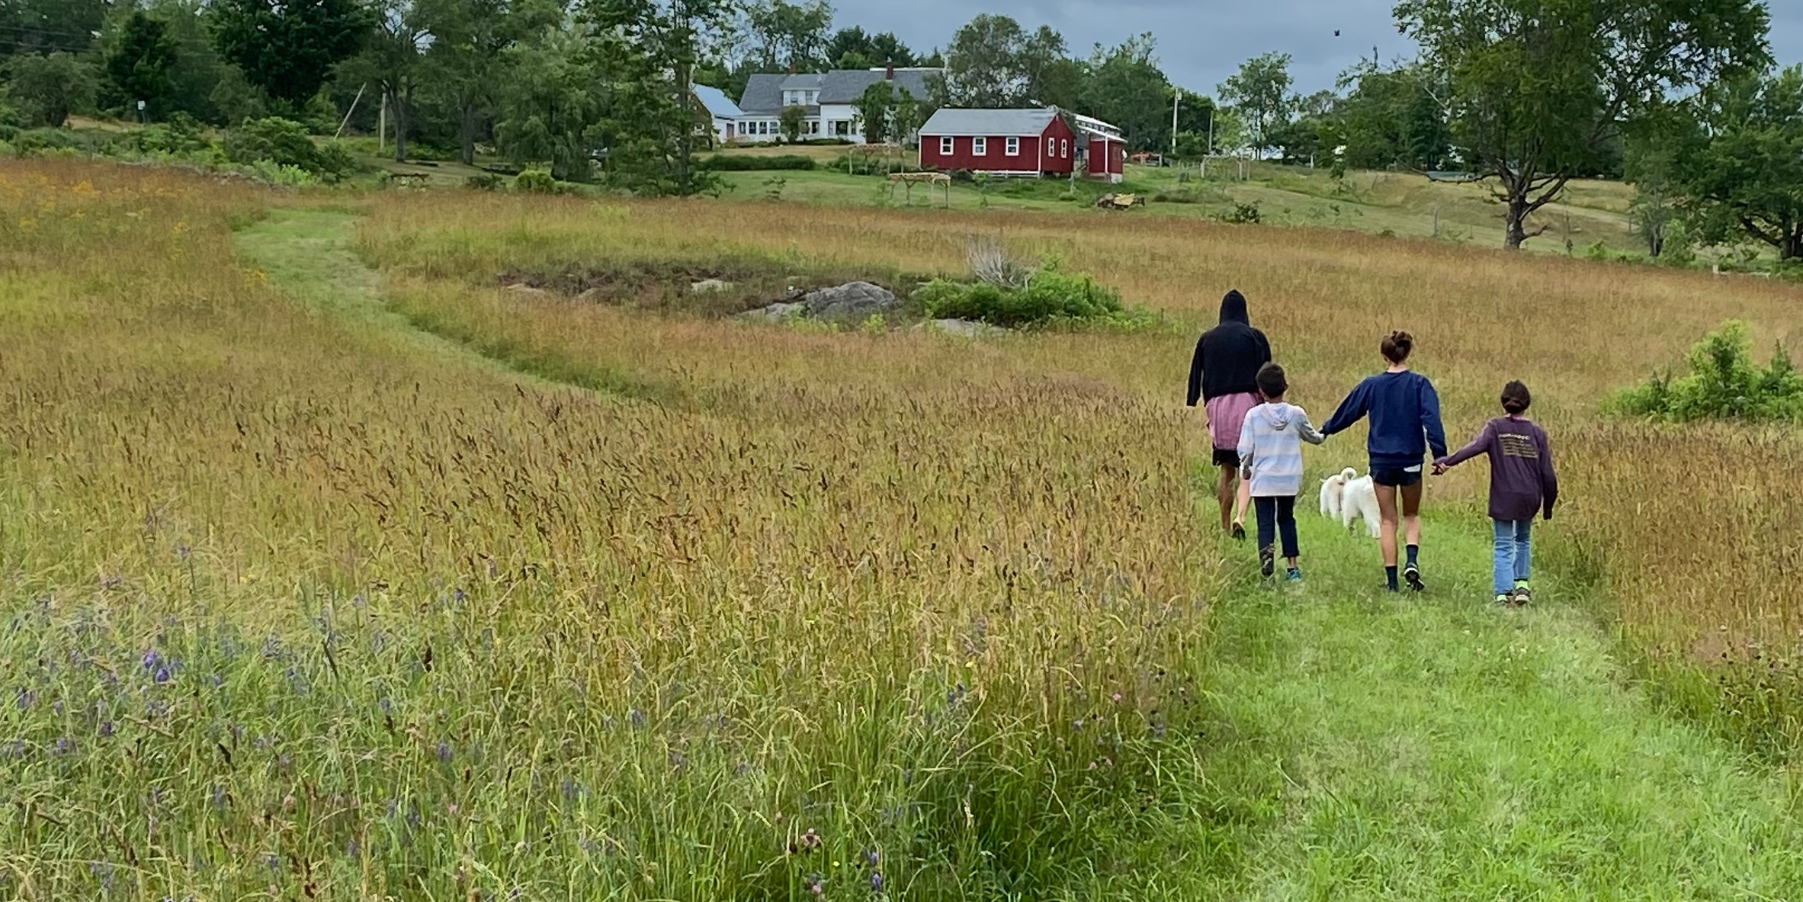 Kids hiking through the farm fields at Pumpkin Vine Family Farm with the farm and red barn in the background.